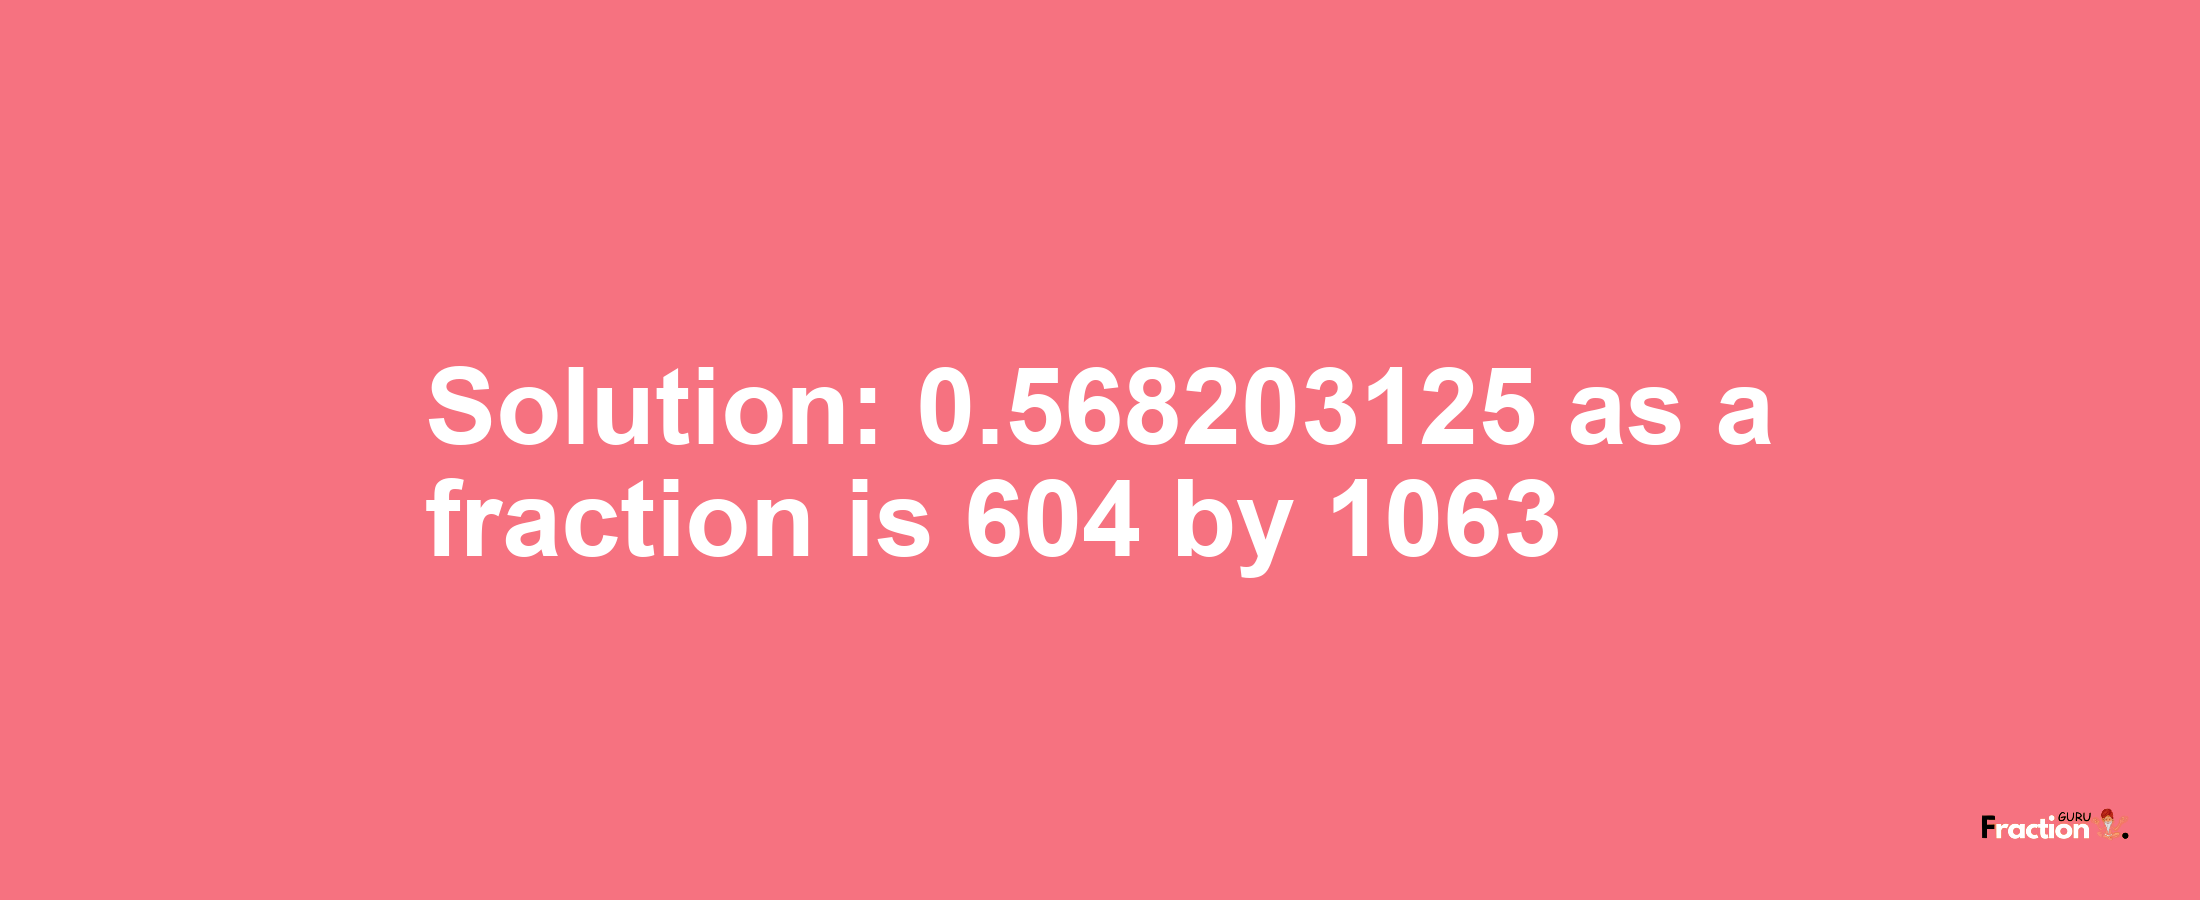 Solution:0.568203125 as a fraction is 604/1063